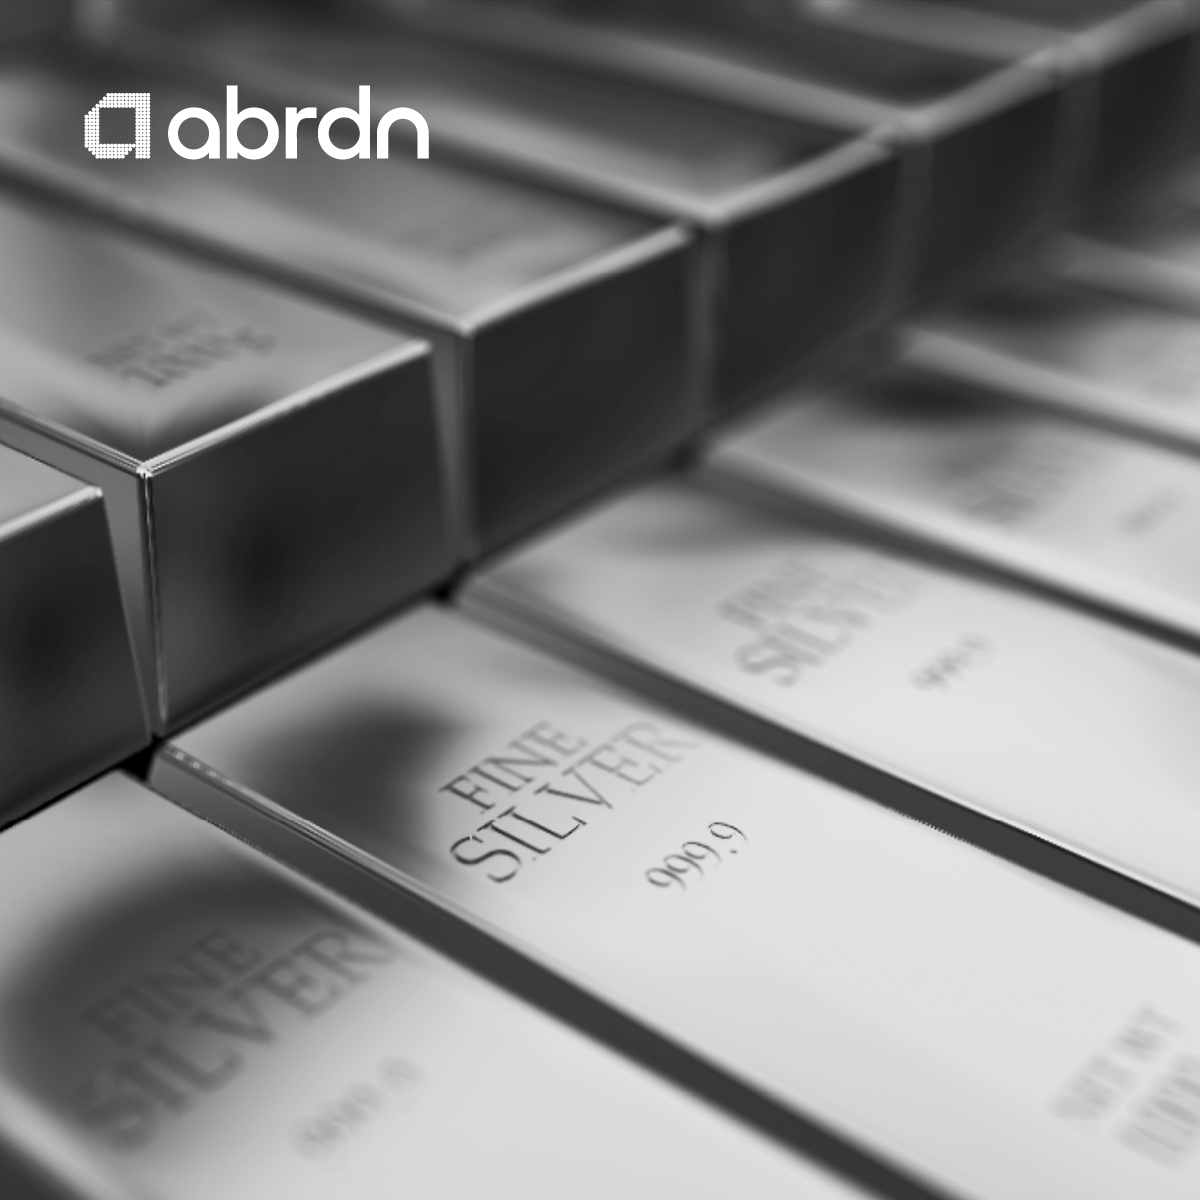 How silver – amid economic boost's bypass – could mean opportunity knocks. Read why this is here: ow.ly/62pG50Re5EF #abrdnInsight #PreciousMetals #ETFs